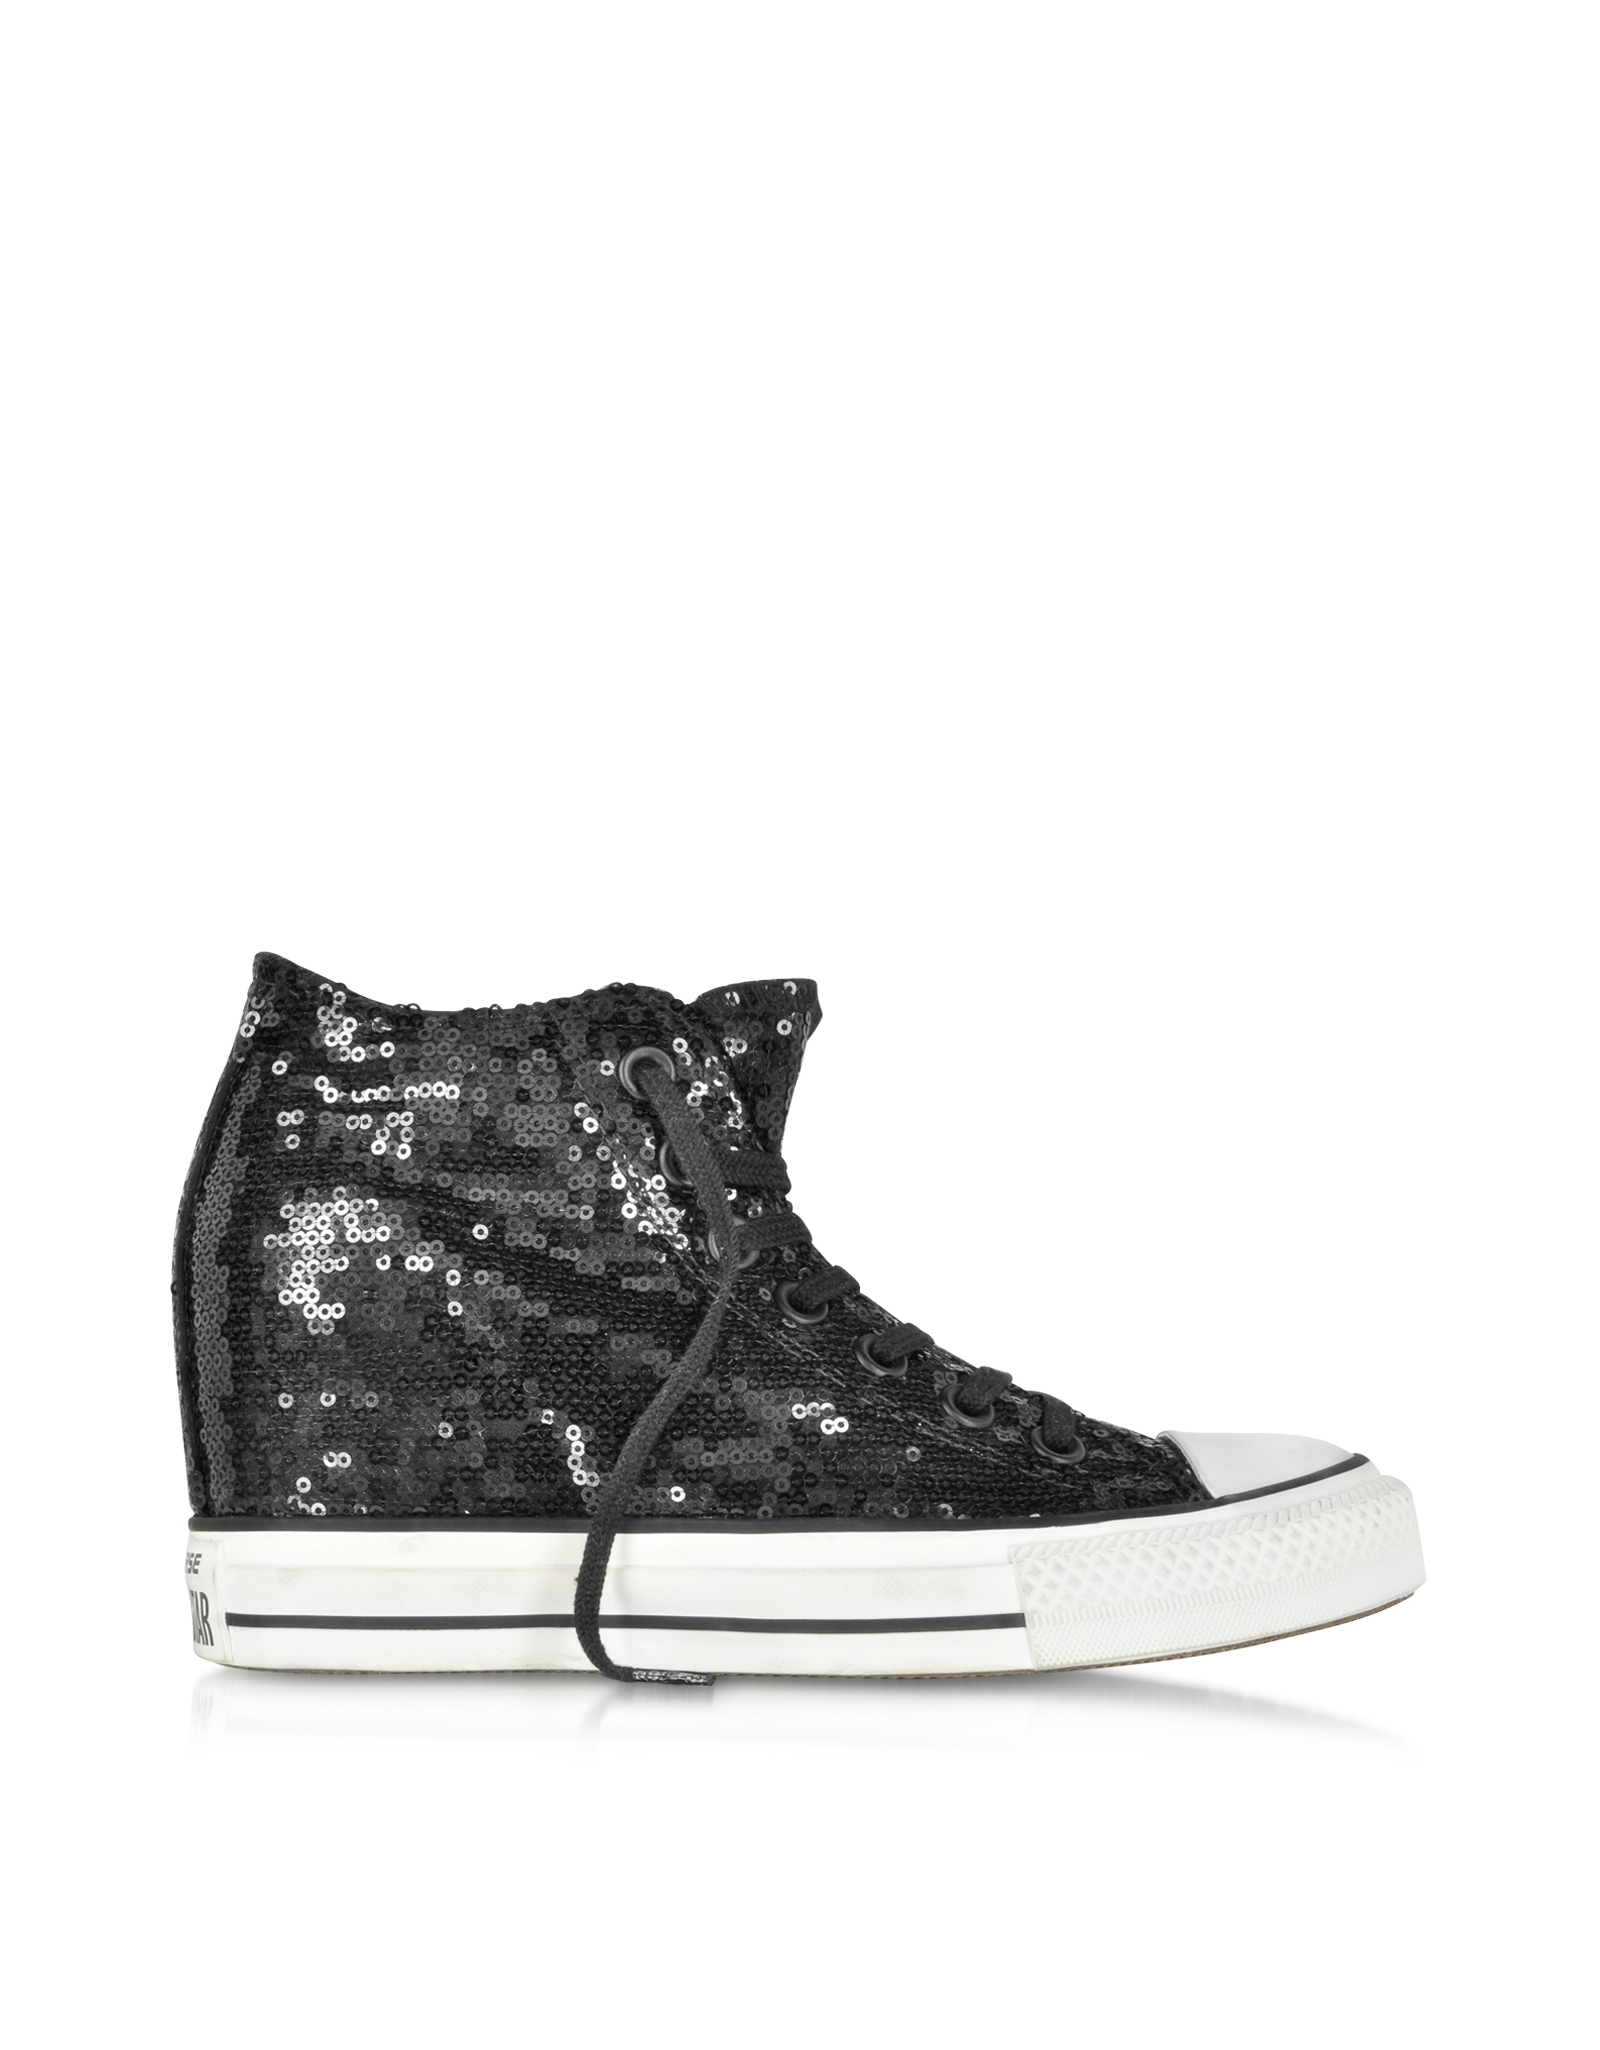 converse all star mid lux